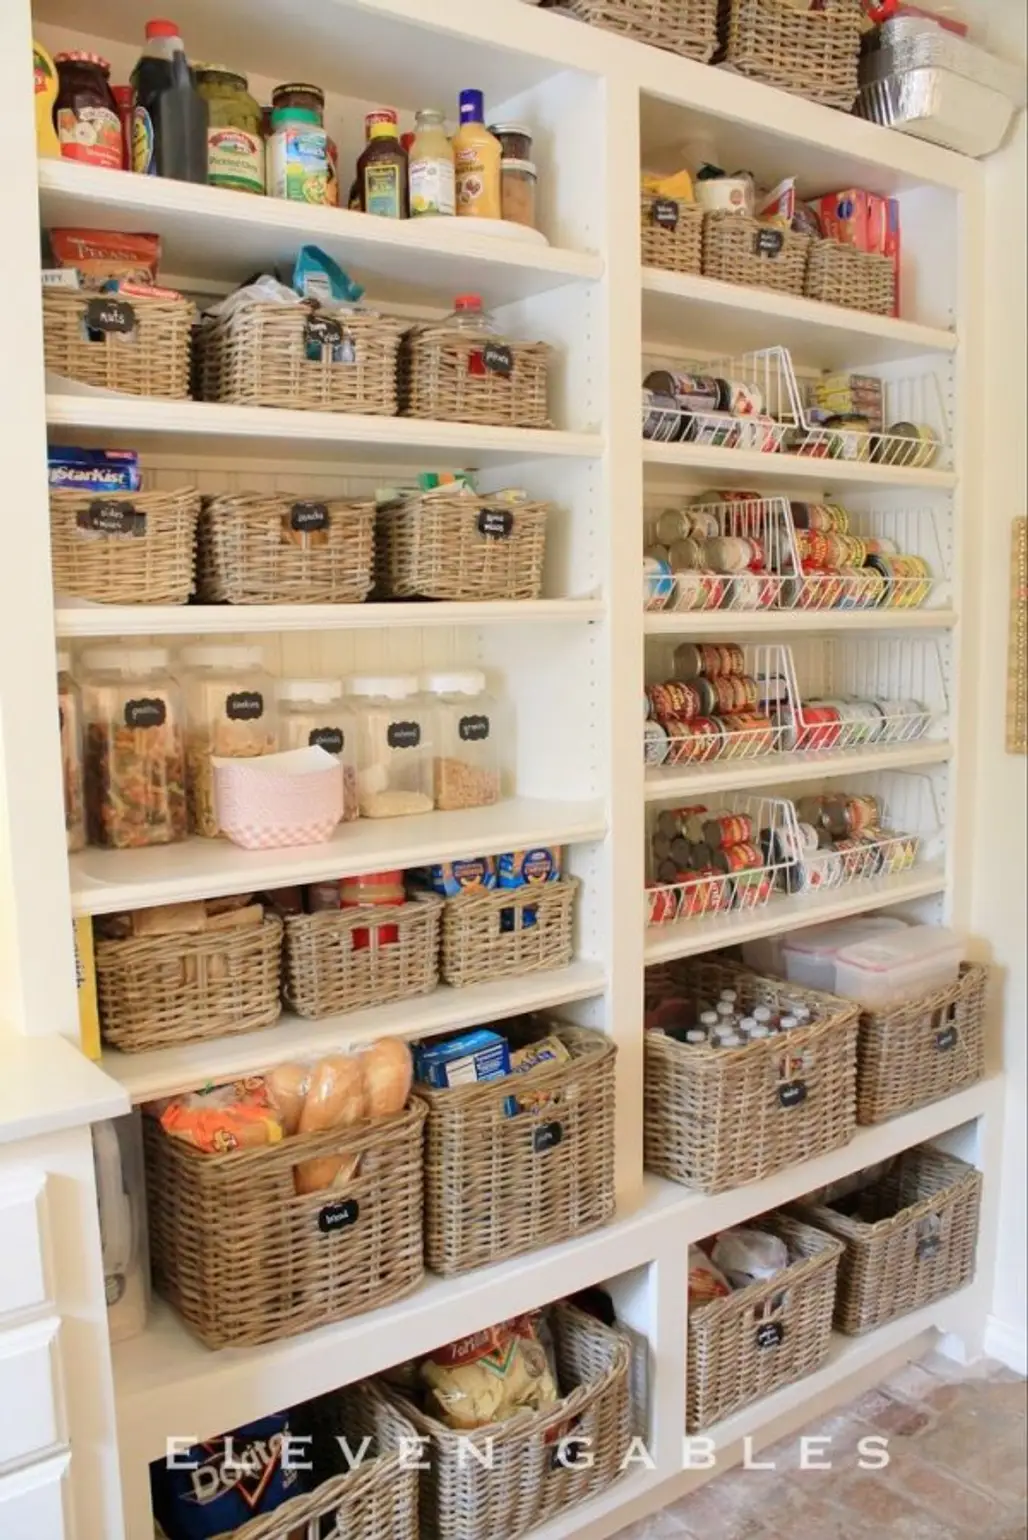 pantry,room,shelf,furniture,home accessories,